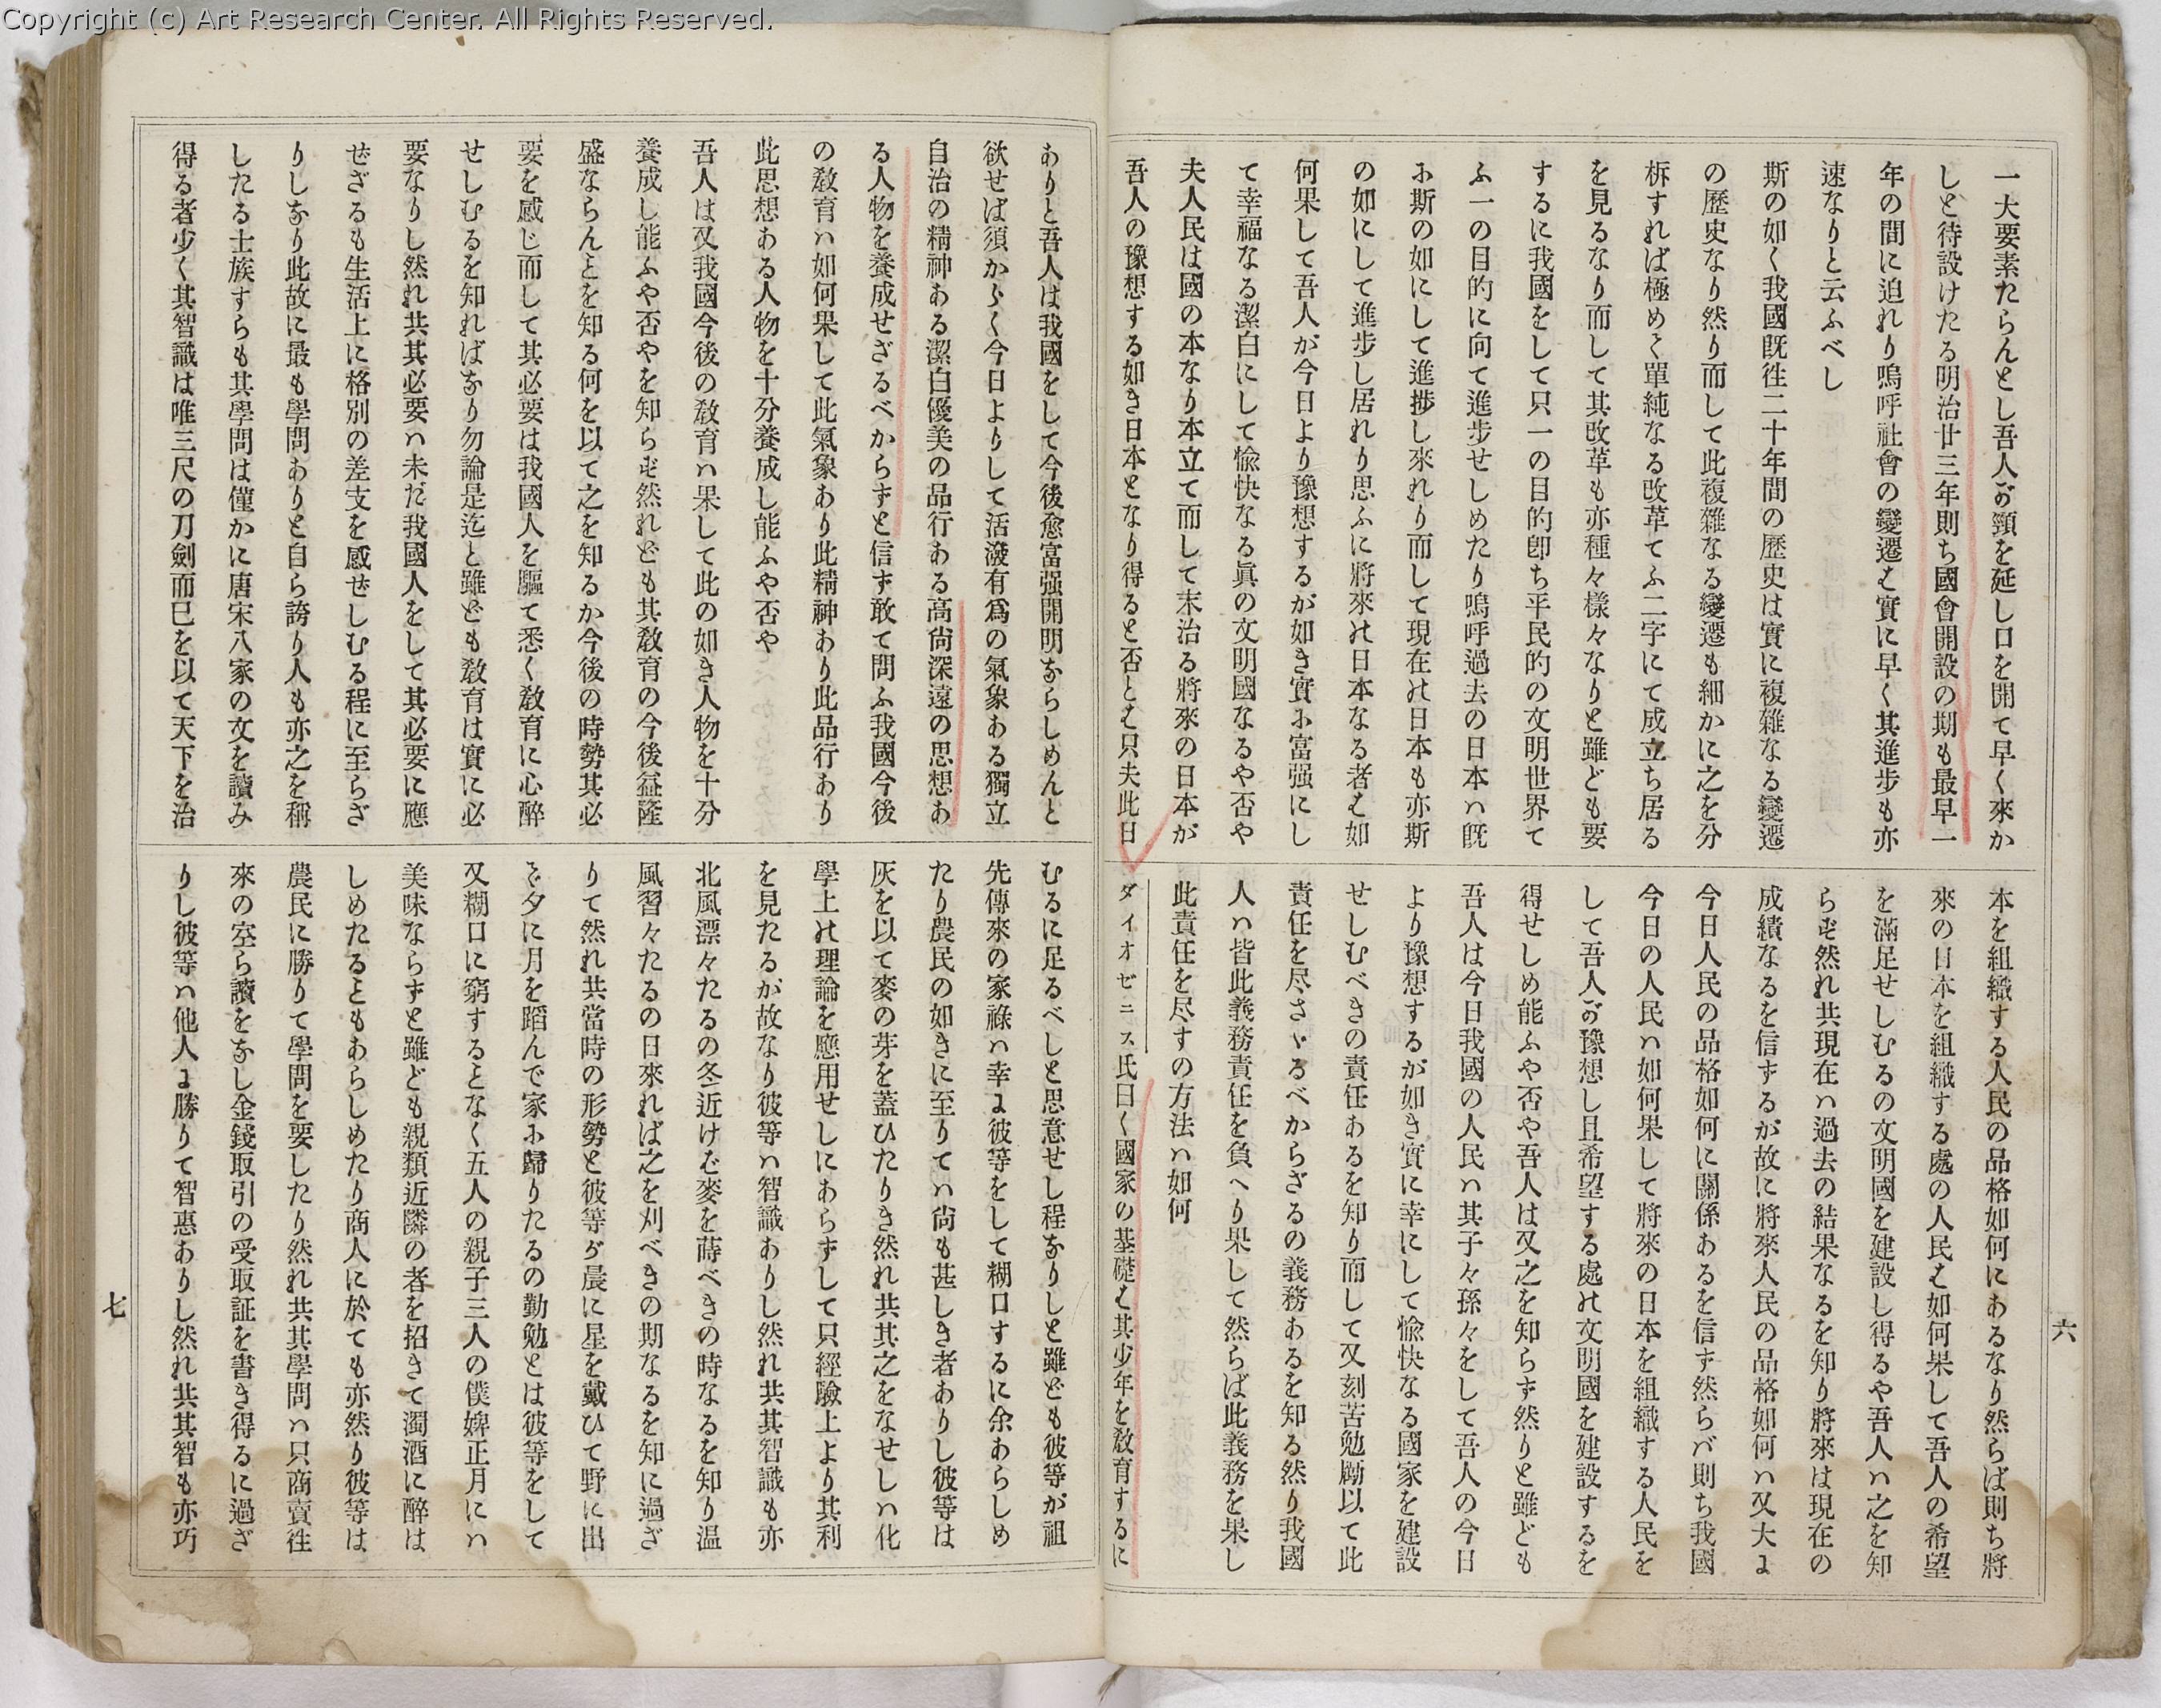 The Early Japanese Book Portal Database 1280